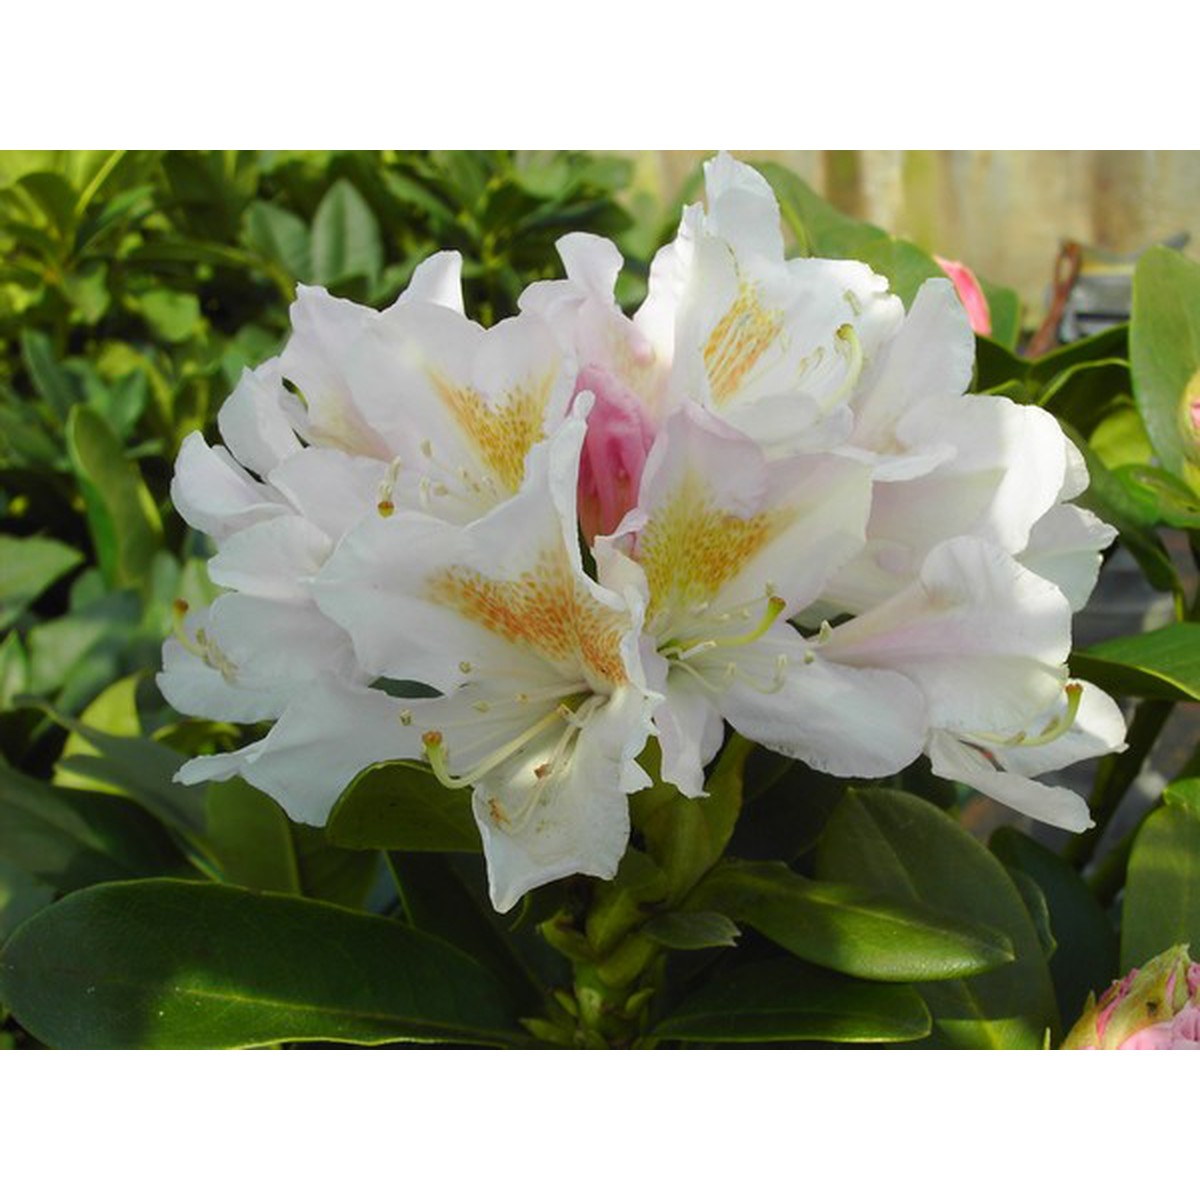   Rhododendron 'Cunningham's White'  C5 40/+